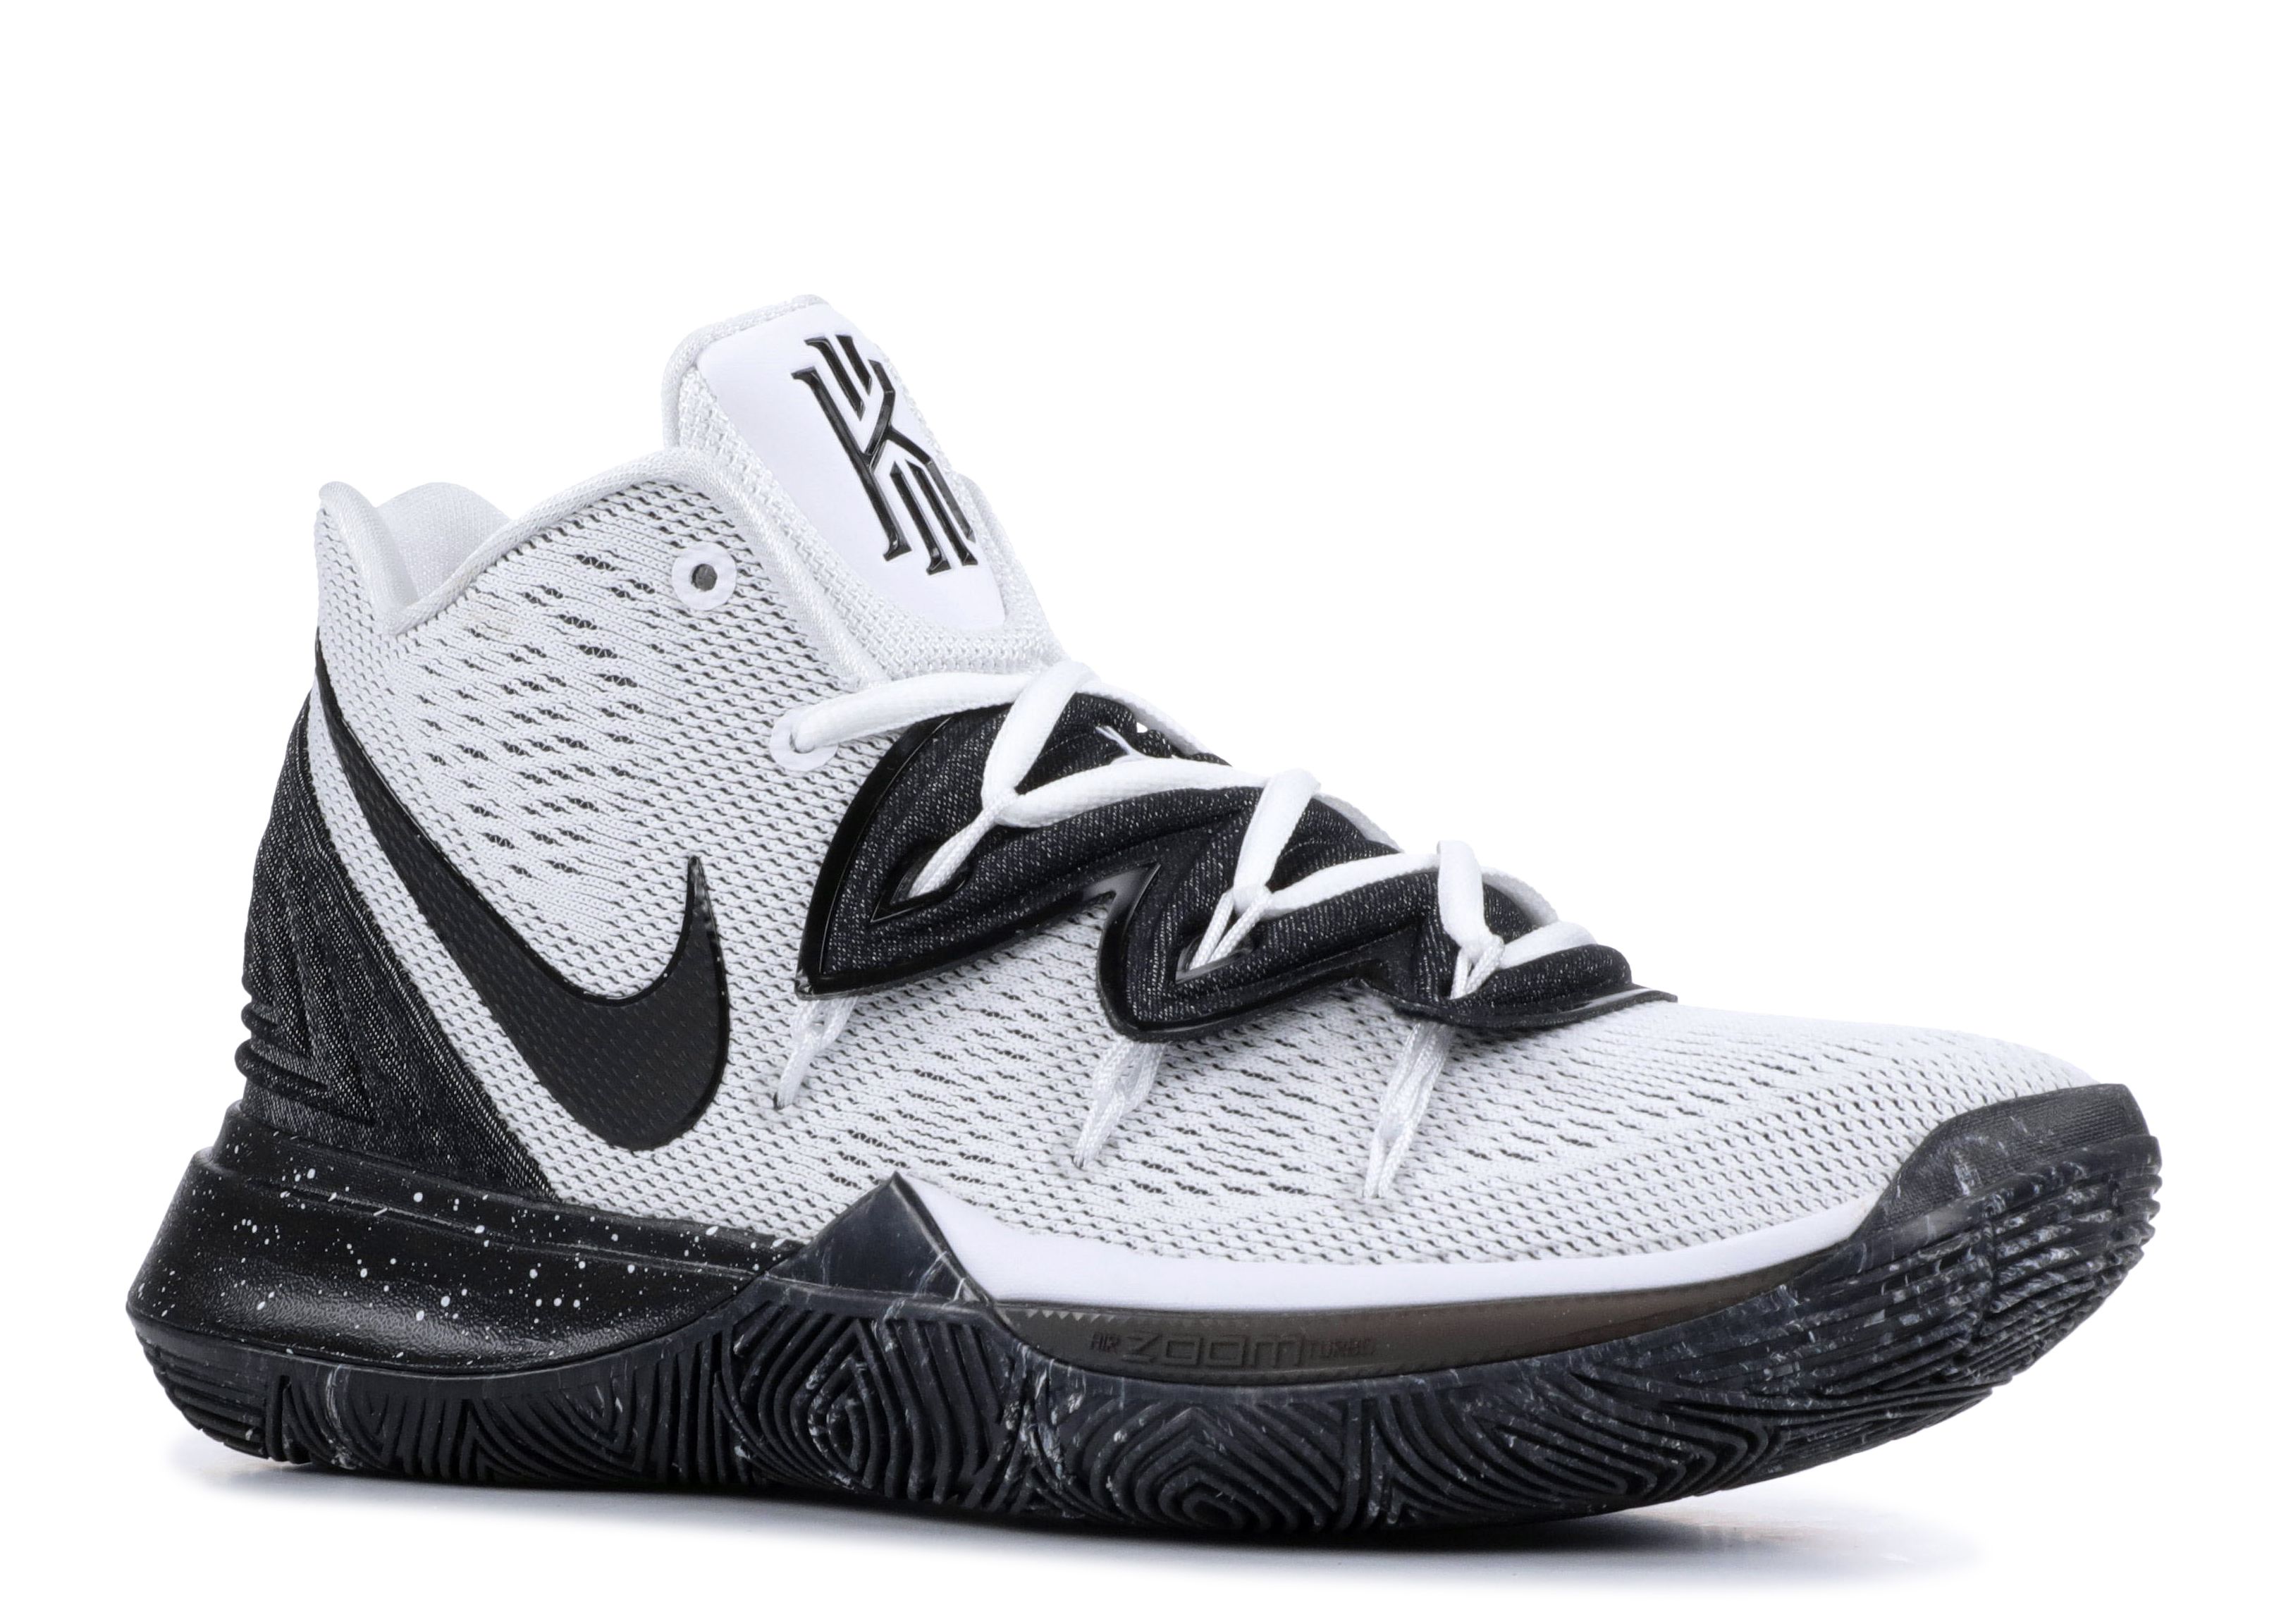 Bay Bay Nike Kyrie 5 Black Magic AO2918 901 Irving 5th generation black and white basketball shoes